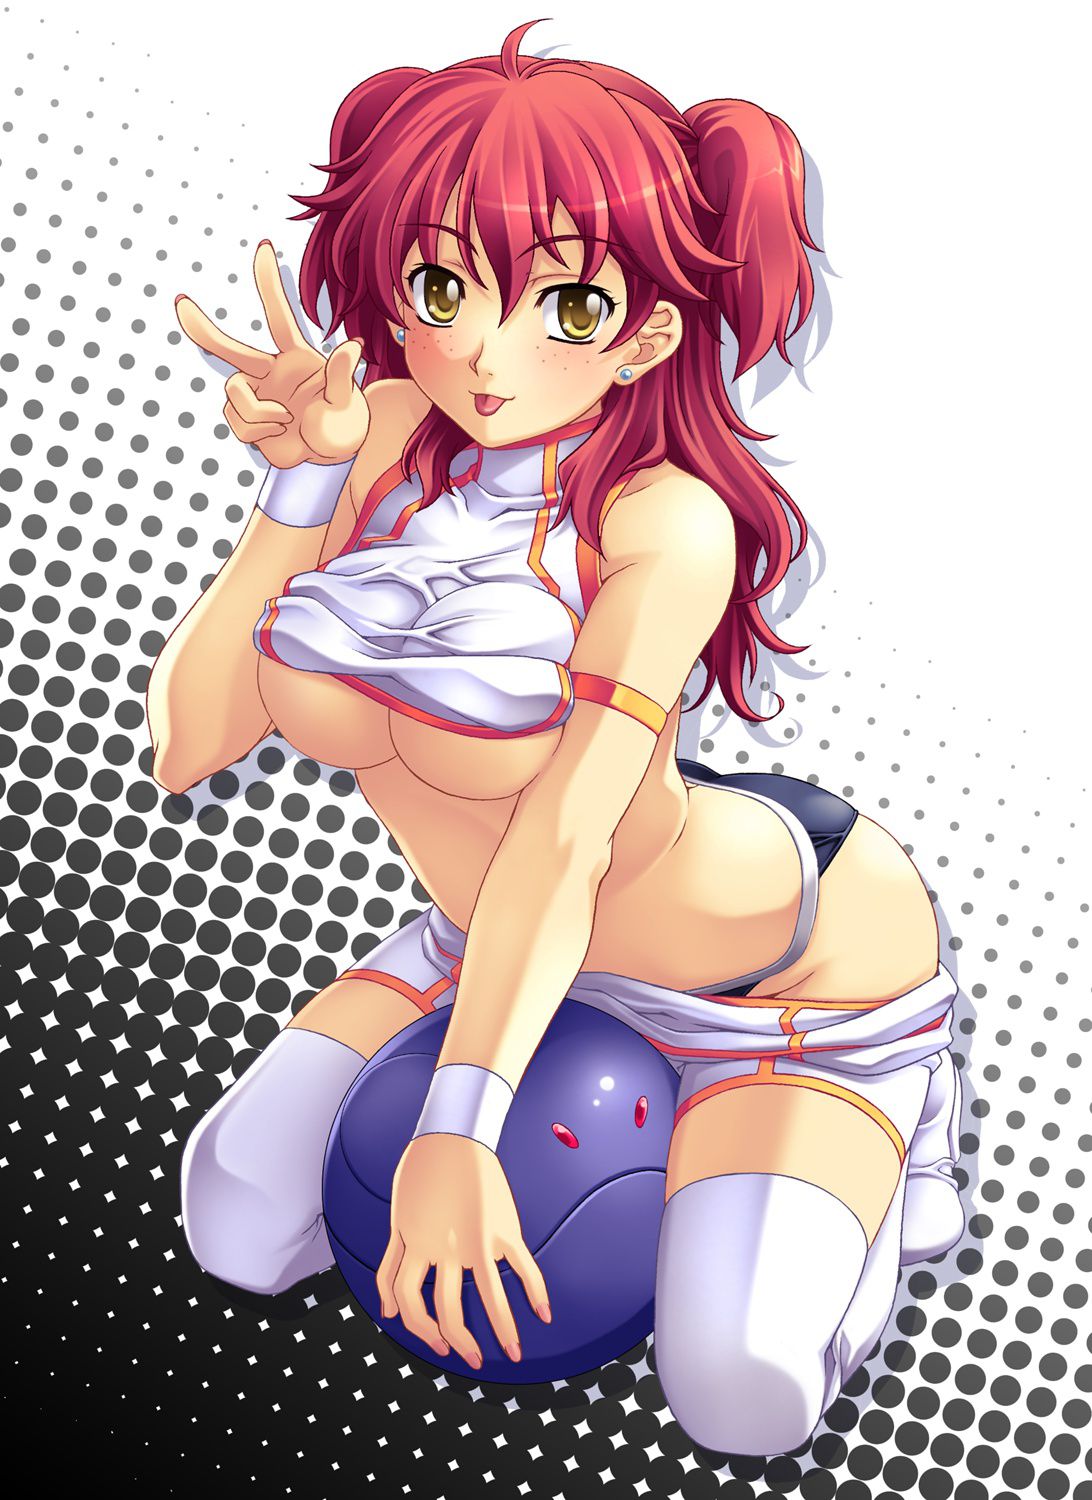 【Secondary Erotica】Click here for a summary of erotic images of Neena Trinity in the Gundam series 7